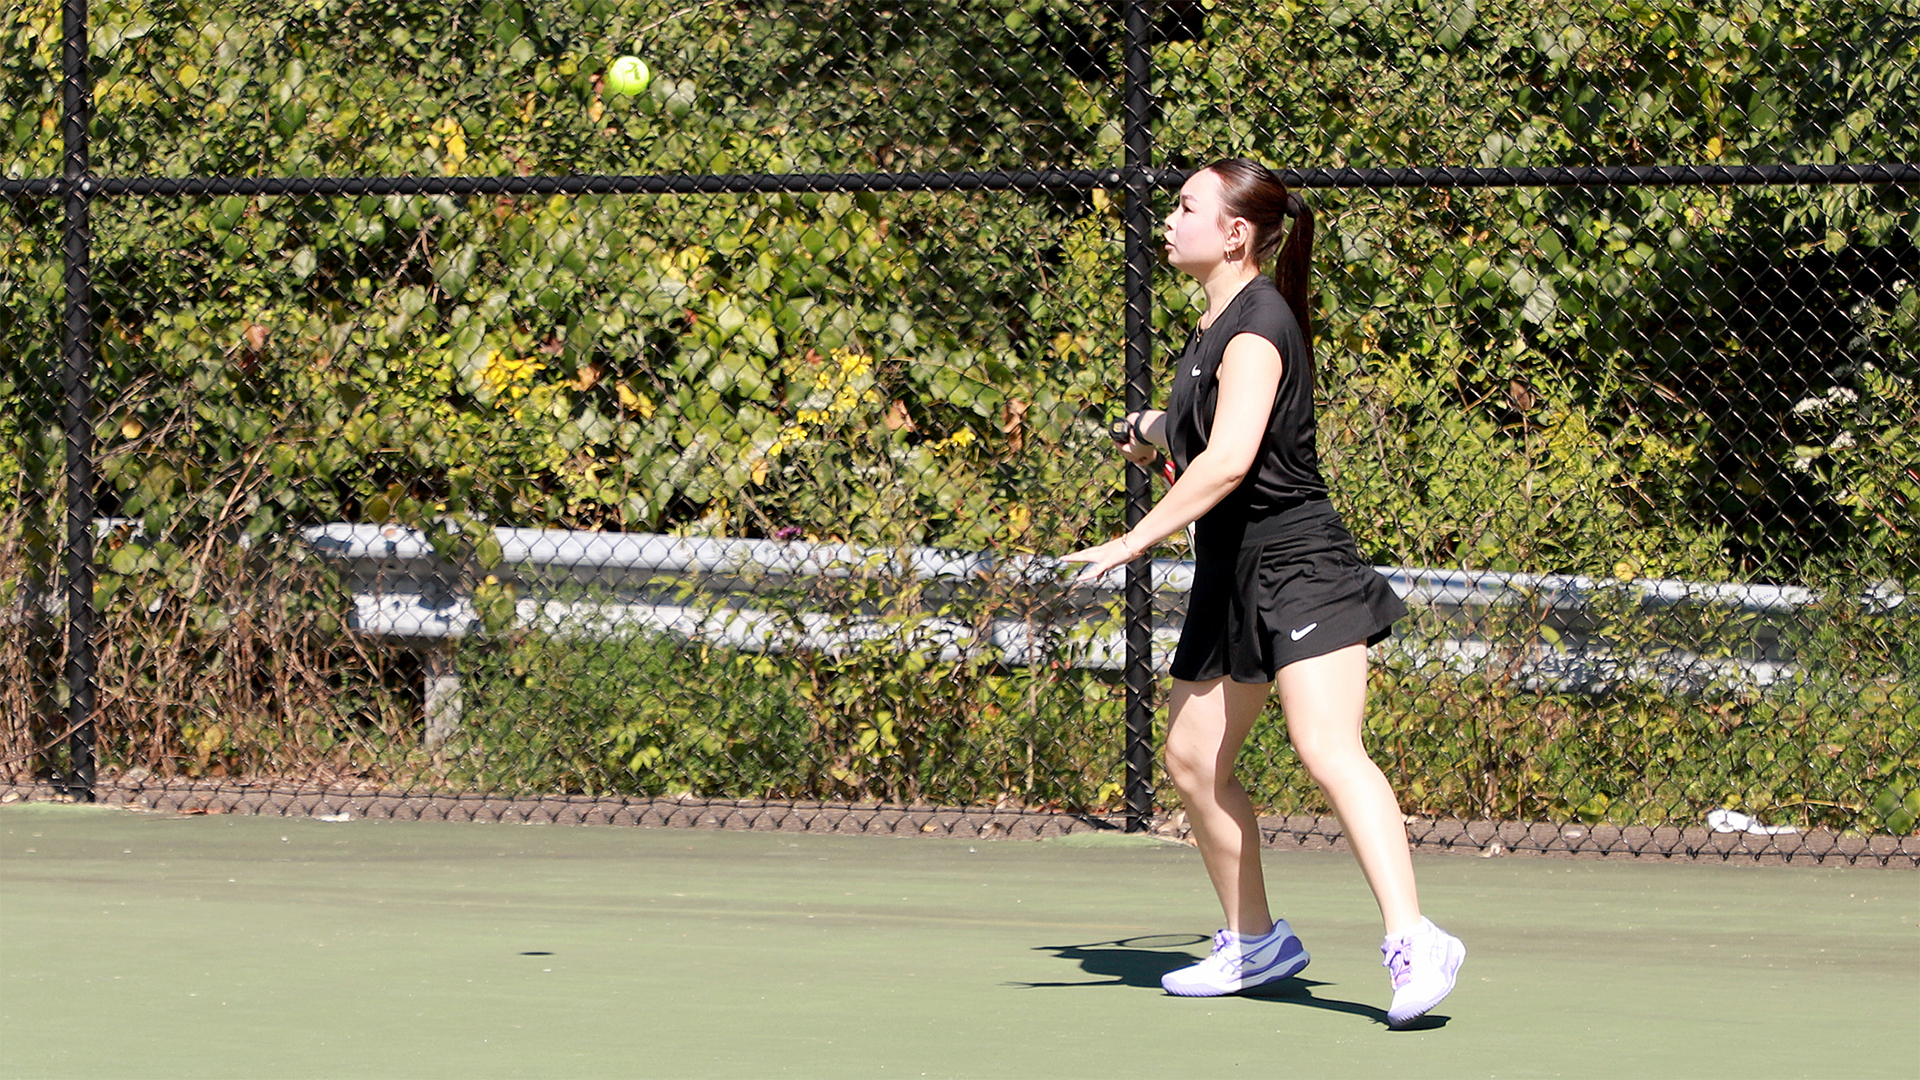 Sofia Hernandez swept the fifth singles game. Photo by Robert Cifone.